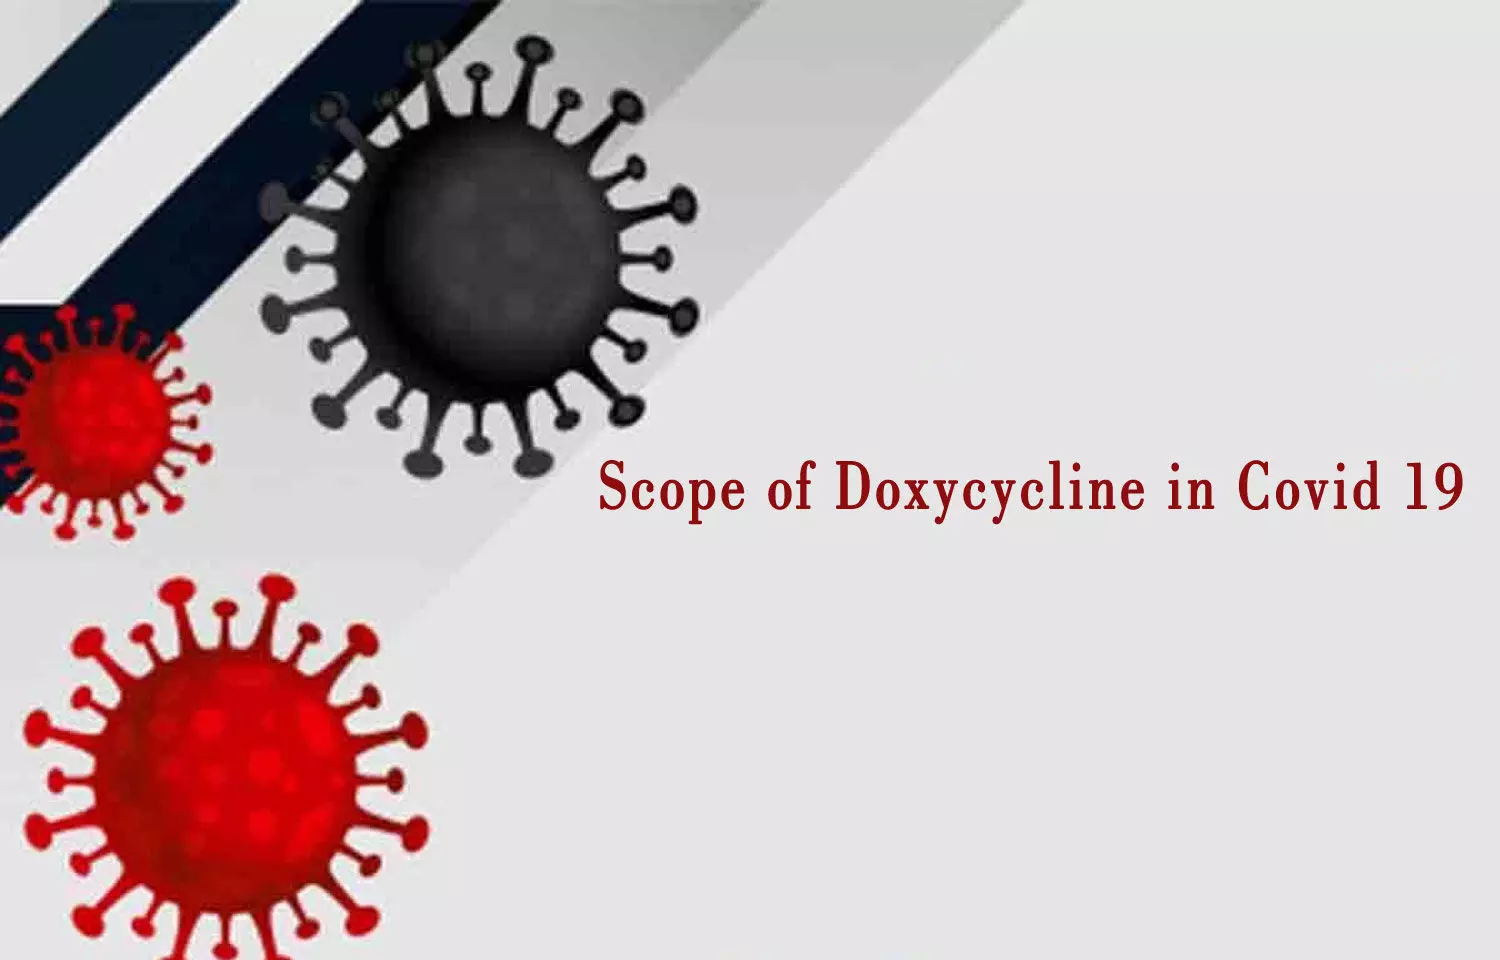 Antibiotic Management in Covid-19: Scope of Doxycycline